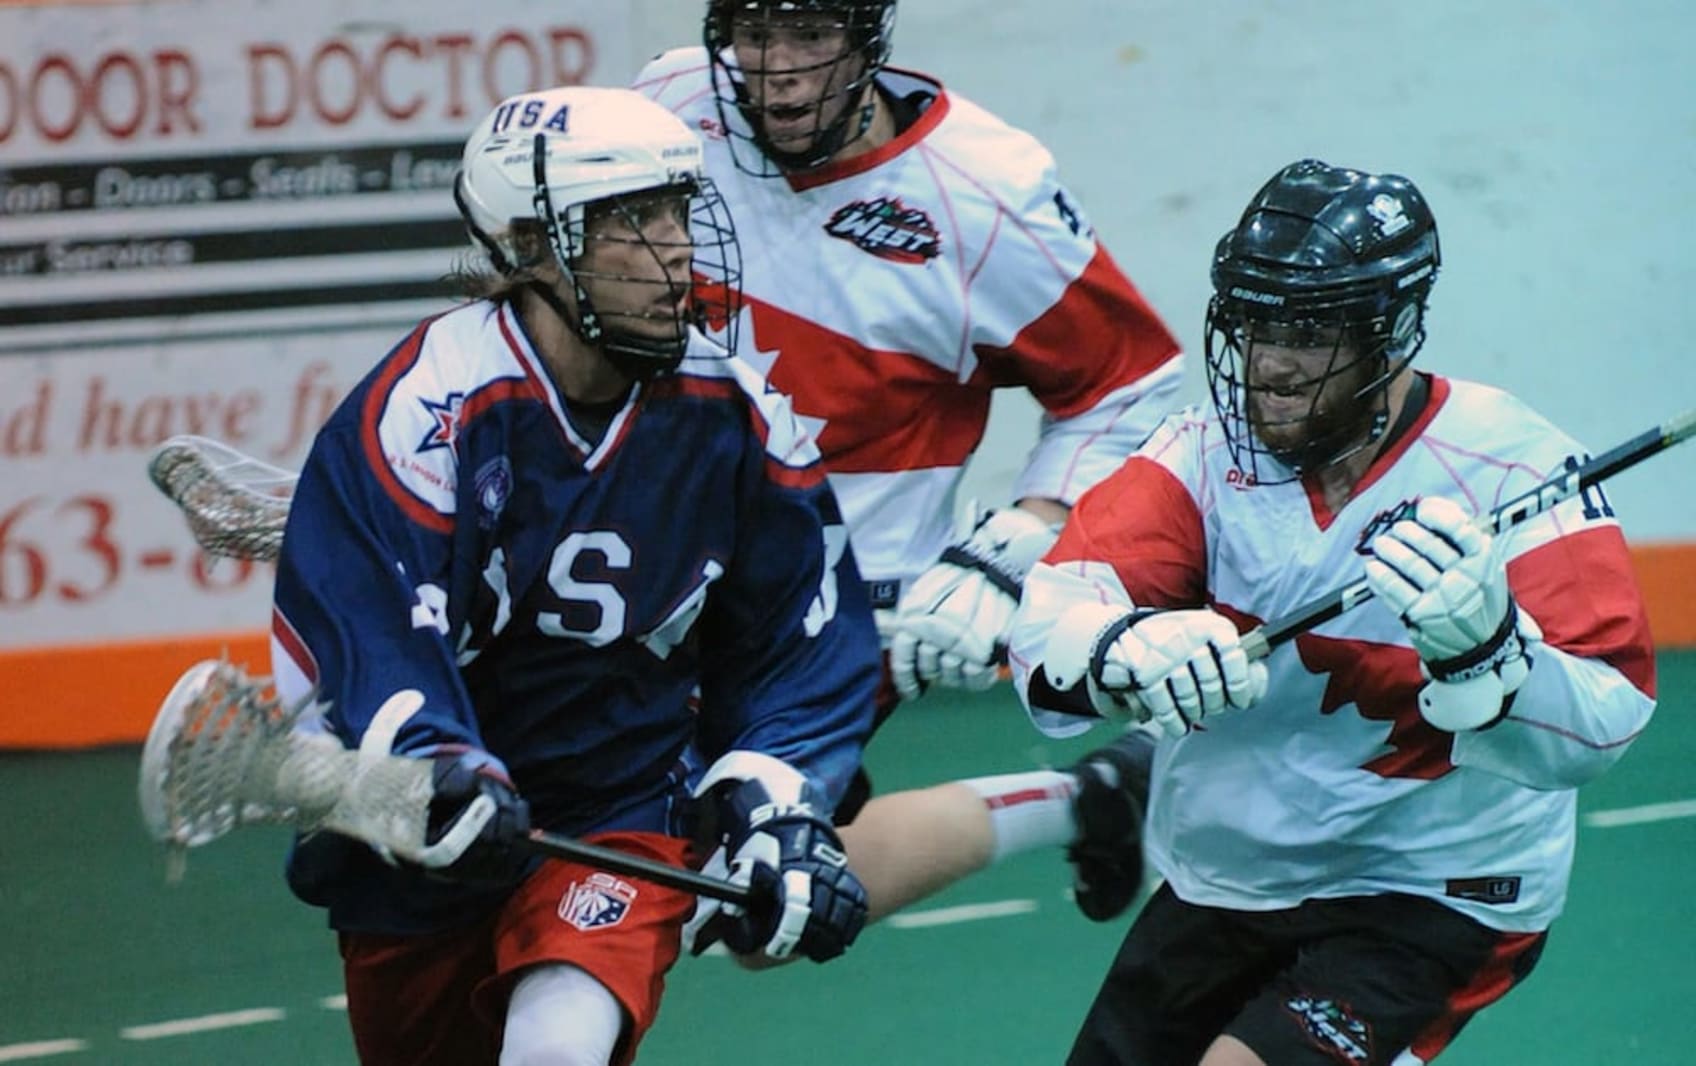 Seals should help grow game of lacrosse at local youth level